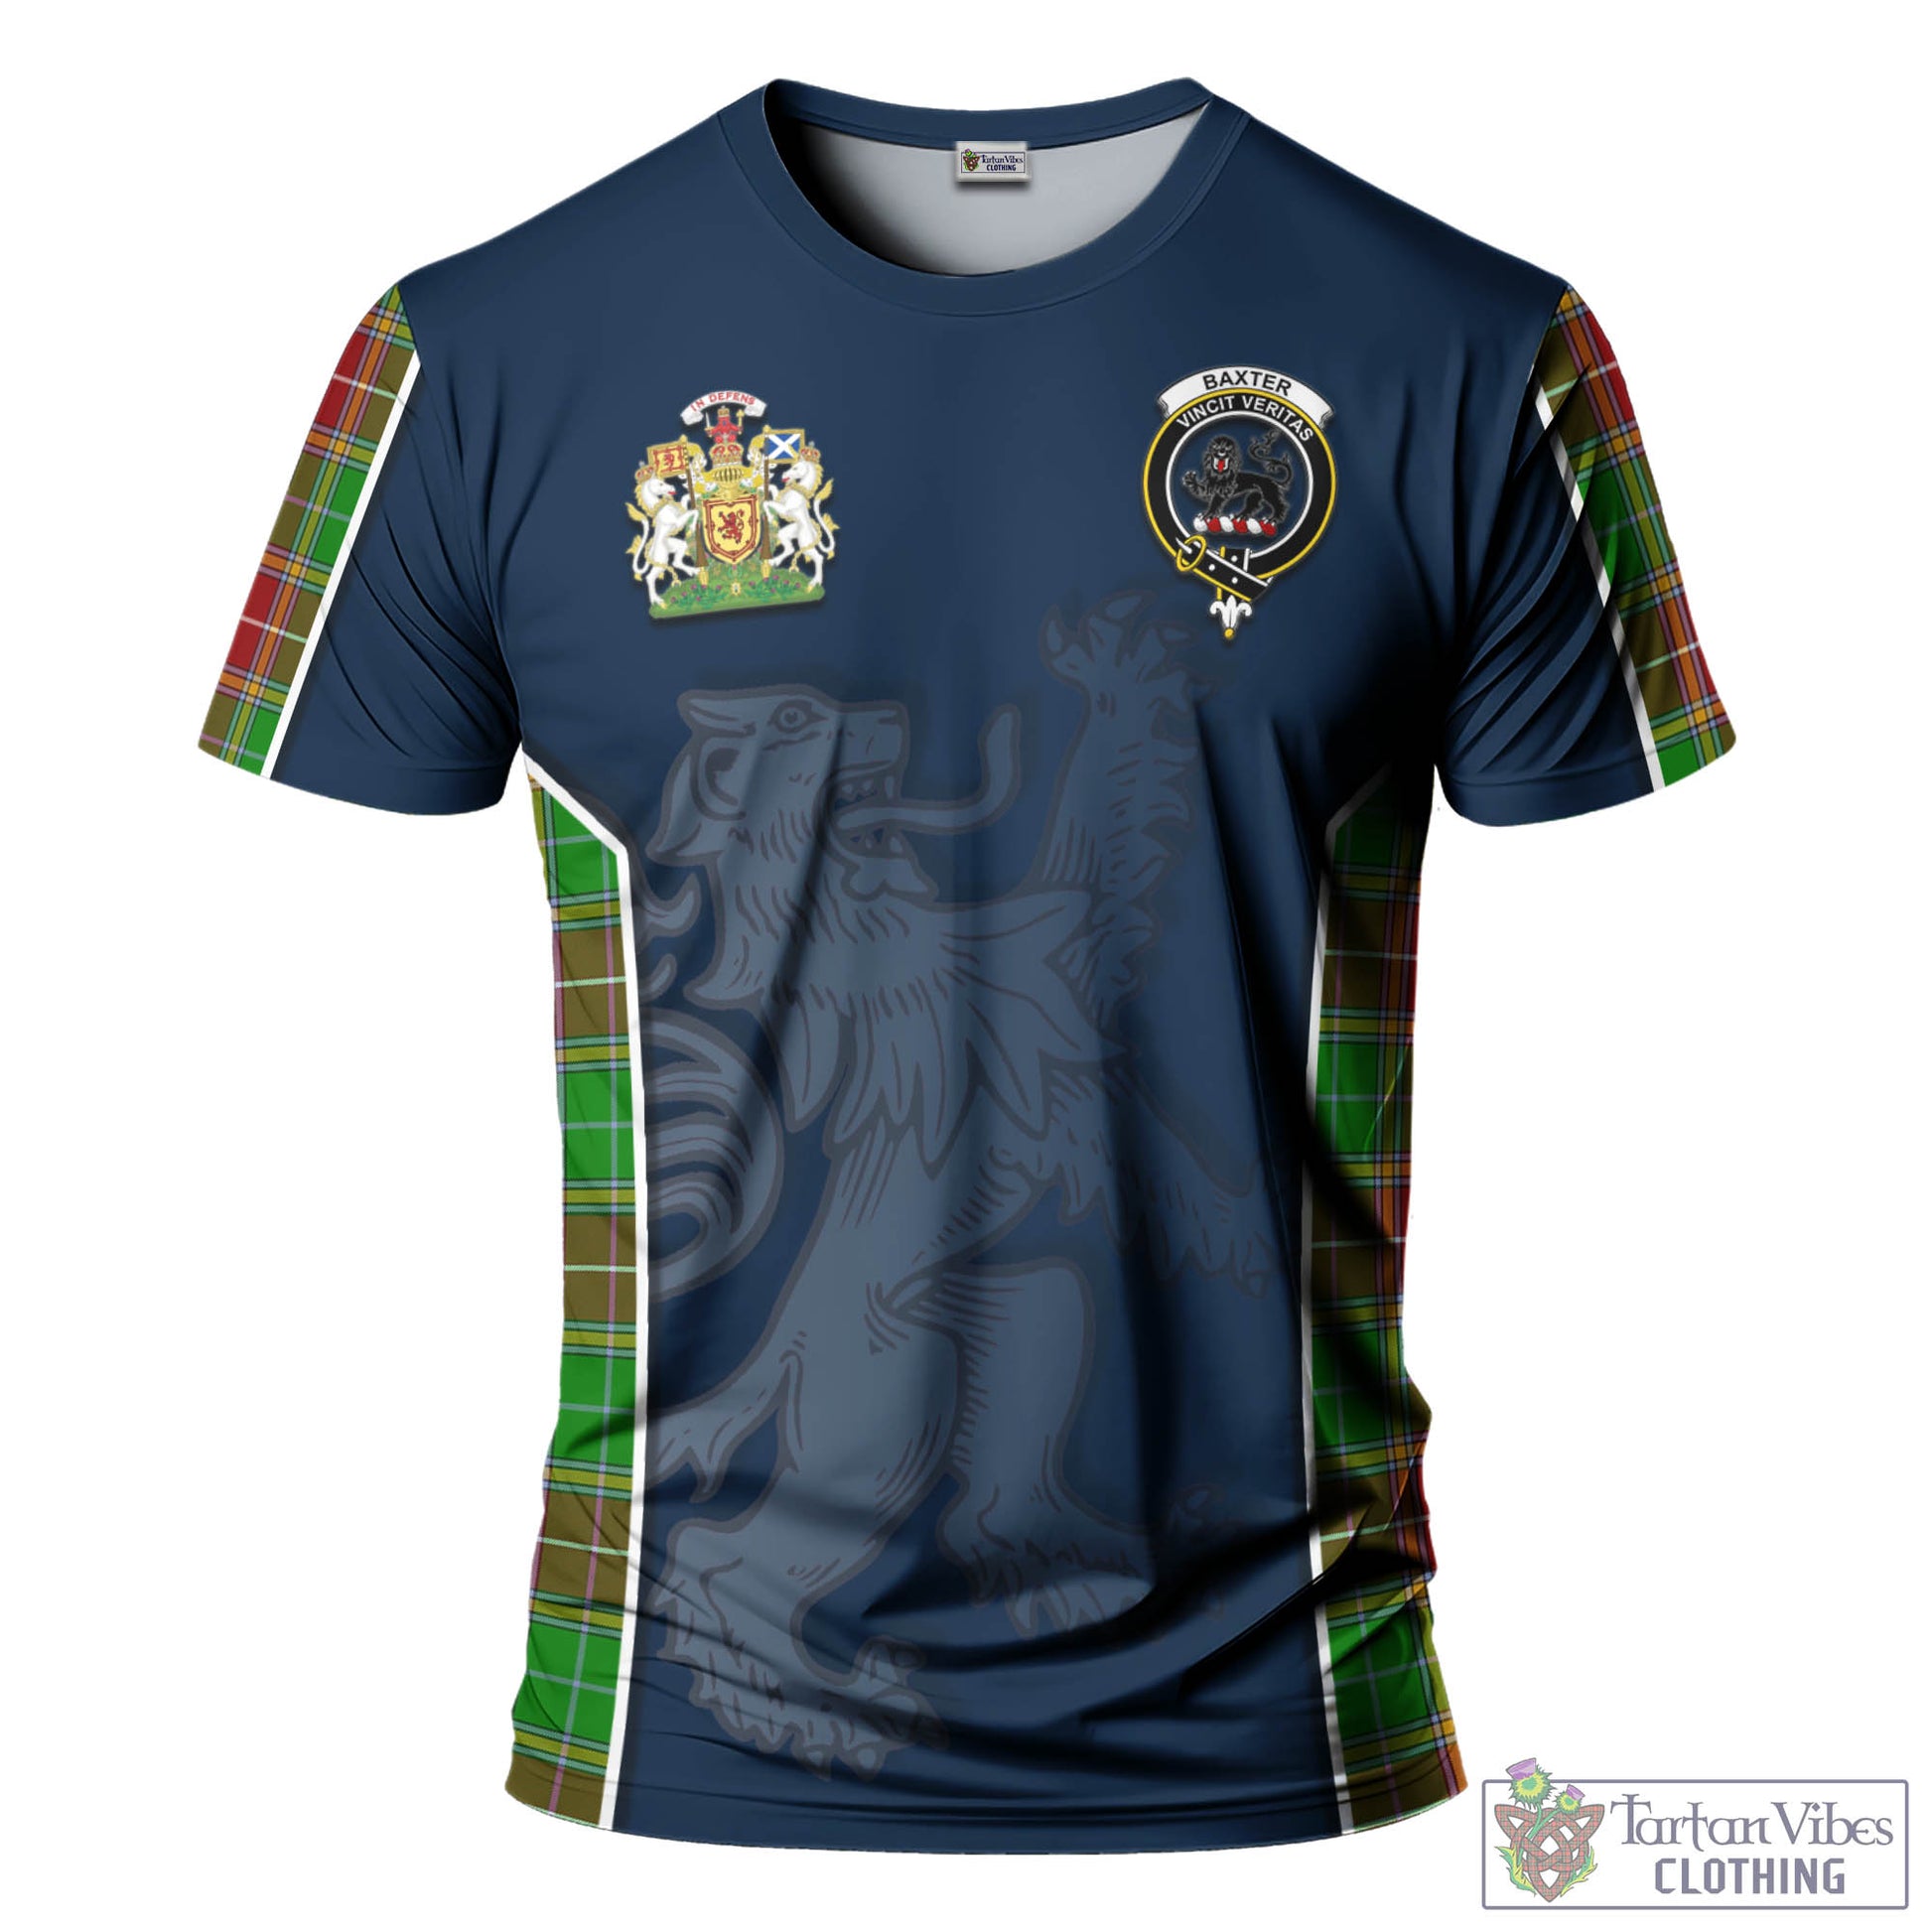 Tartan Vibes Clothing Baxter Modern Tartan T-Shirt with Family Crest and Lion Rampant Vibes Sport Style